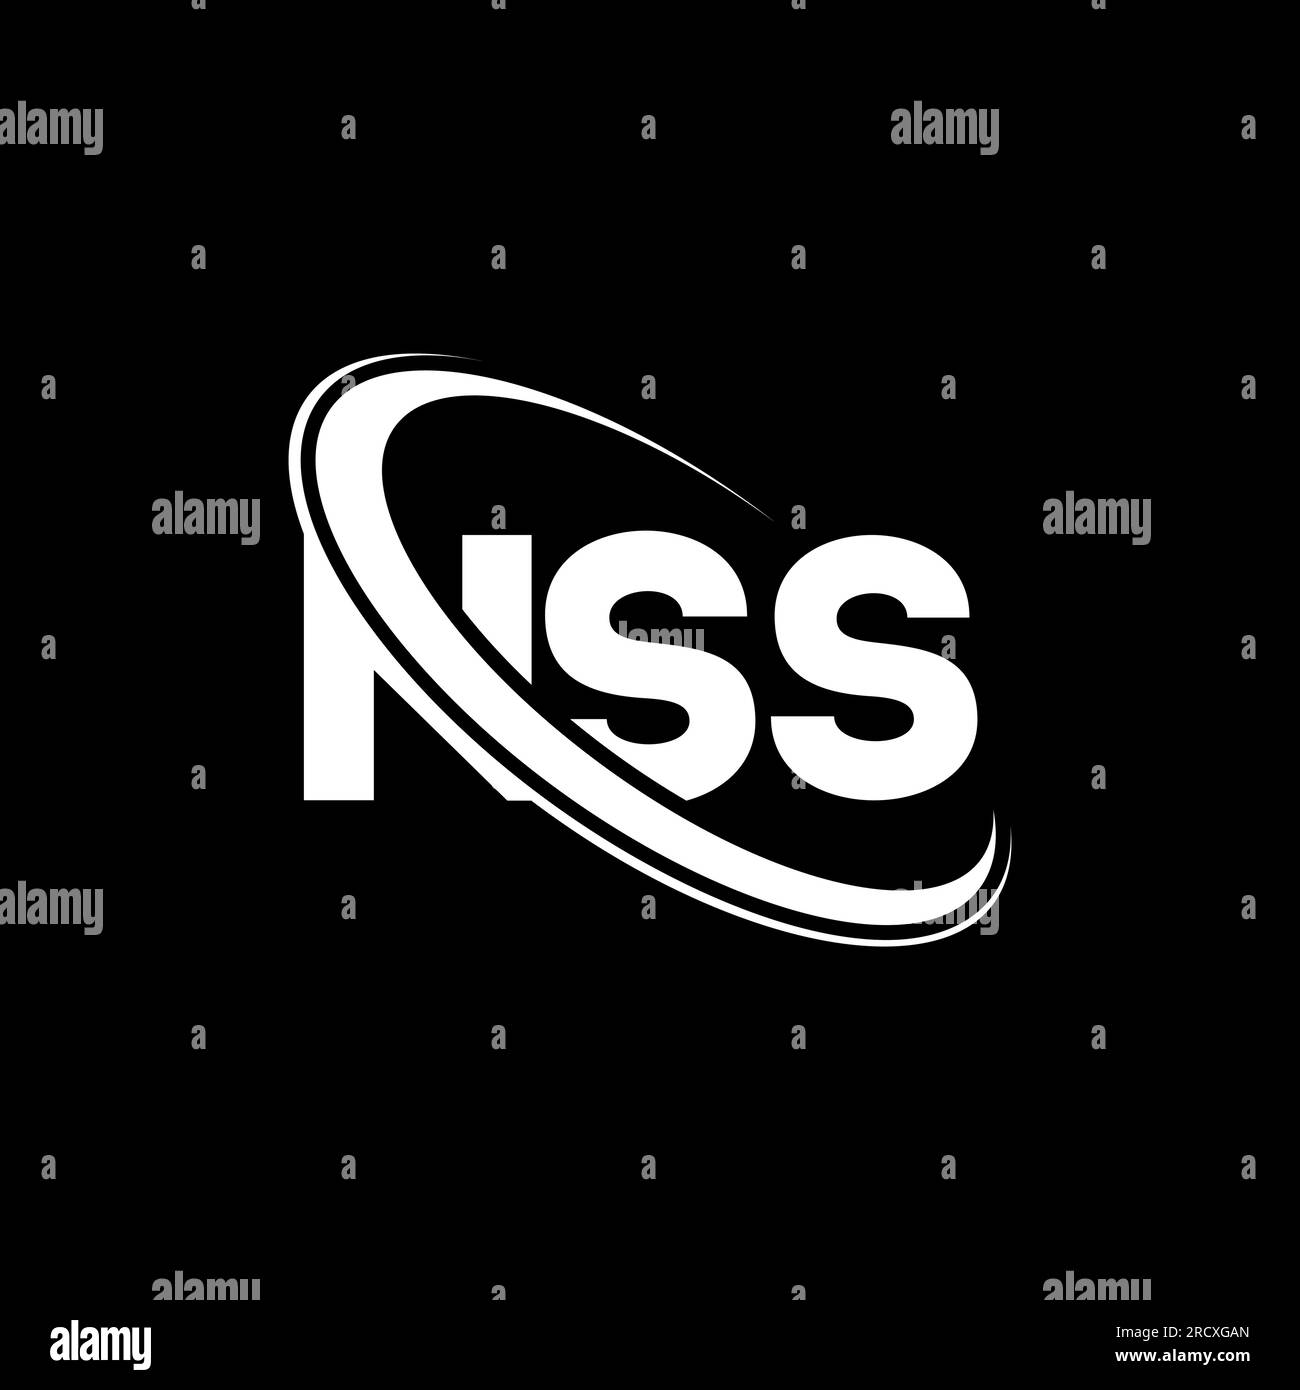 Nss Black and White Stock Photos & Images - Alamy